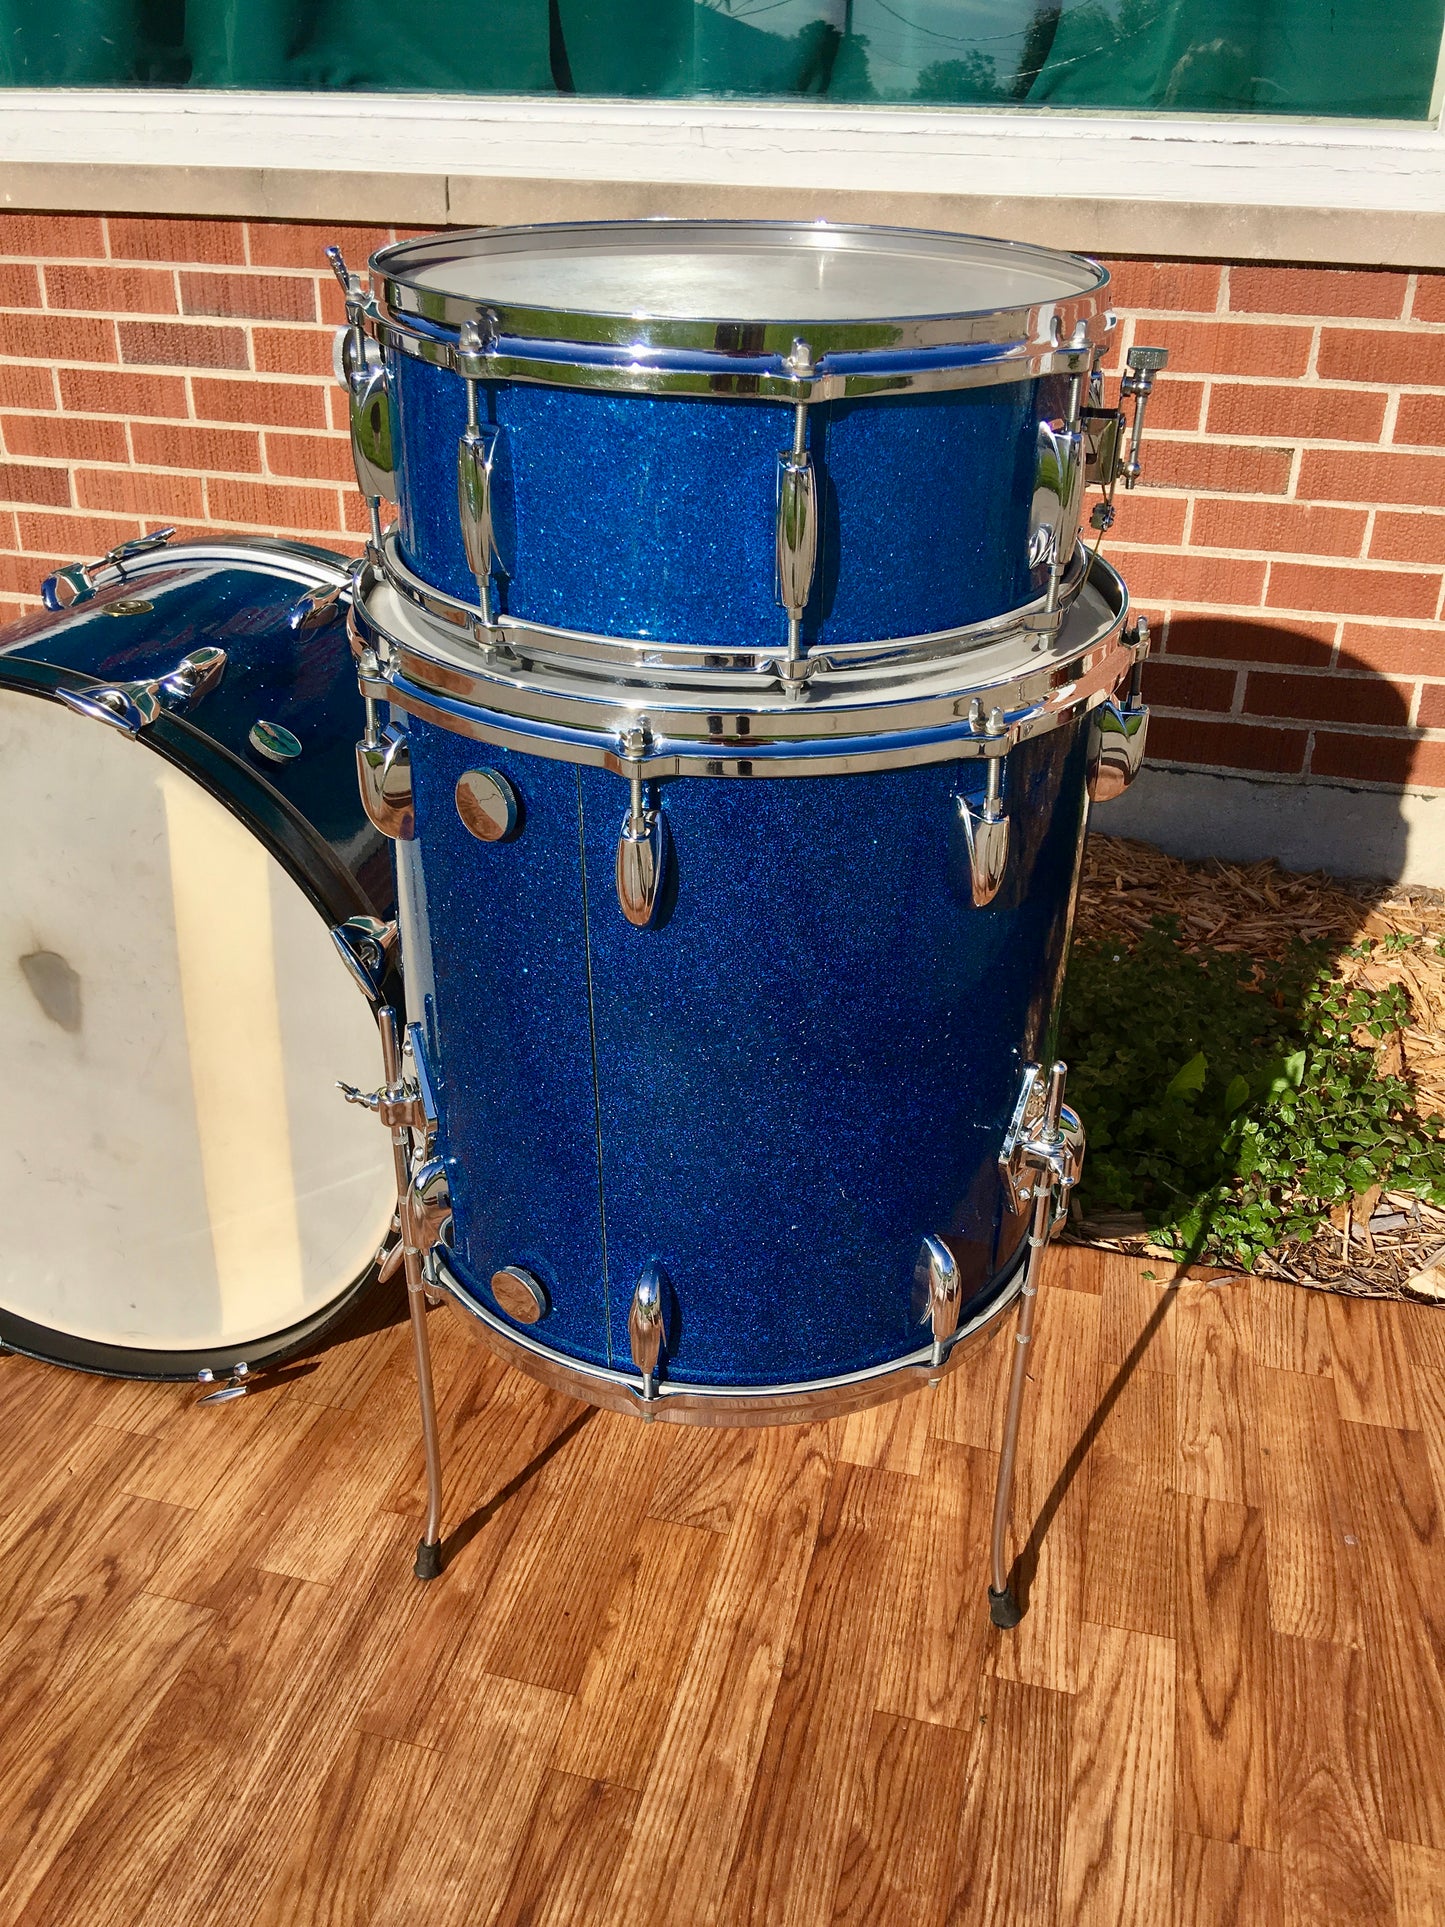 1959/60 Gretsch Round Badge Broadkaster Name-Band Drum Set - Blue Glass Glitter 22/13/16/5x14 Snare